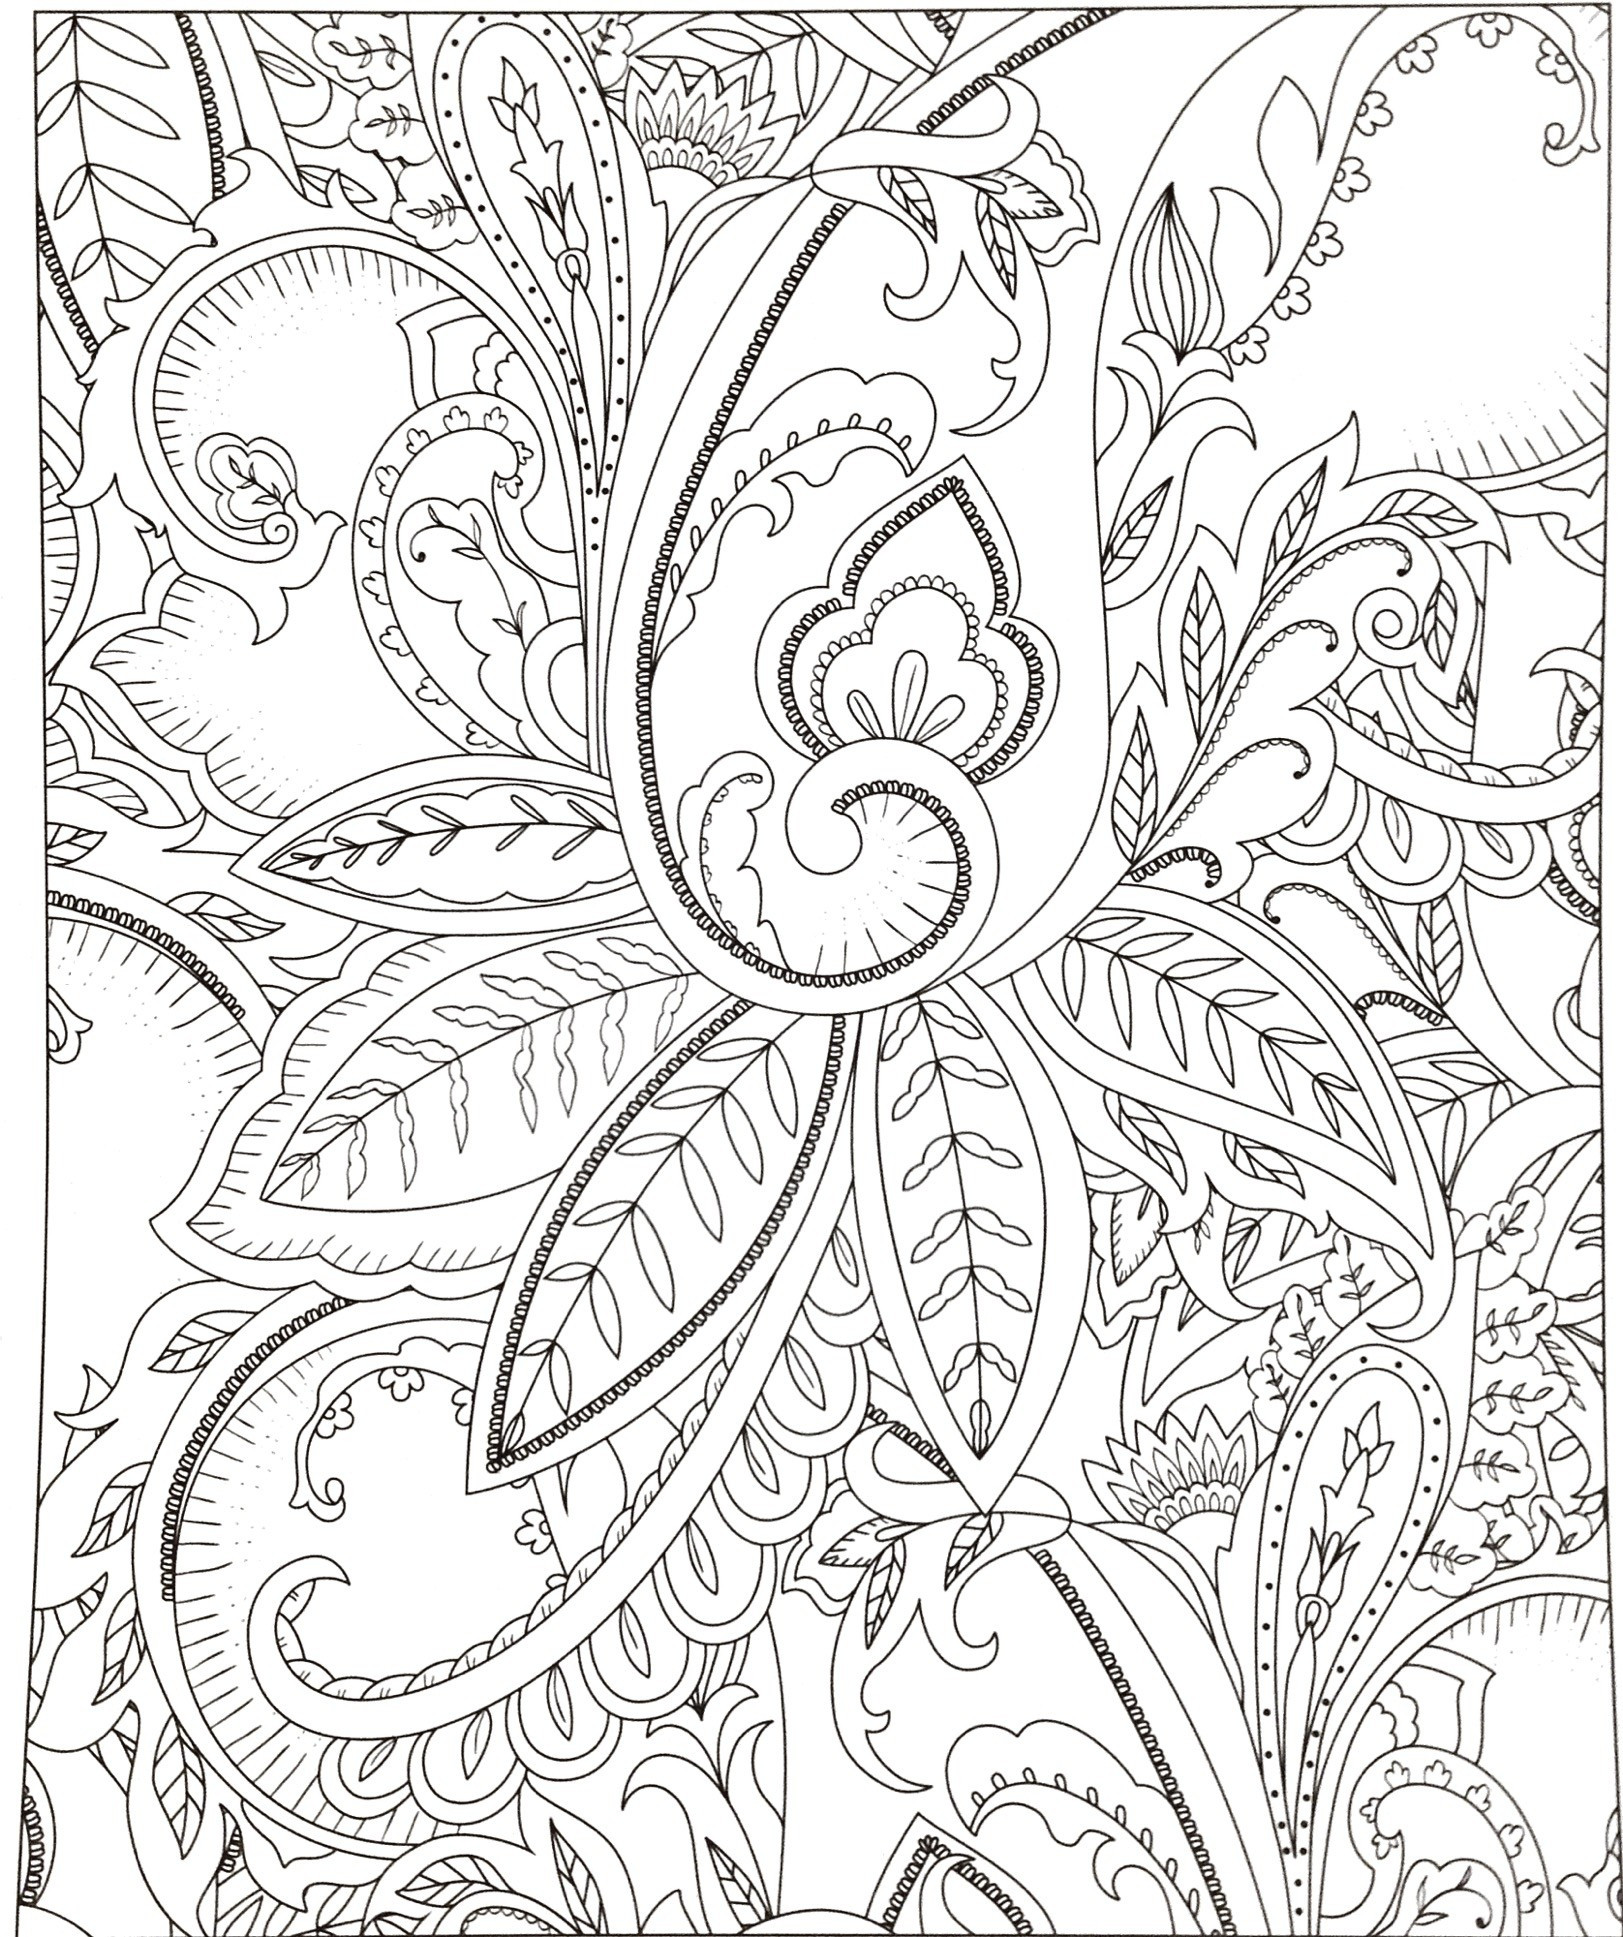 Colorama Coloring Book Pages Colored
 Colorama Coloring Pages